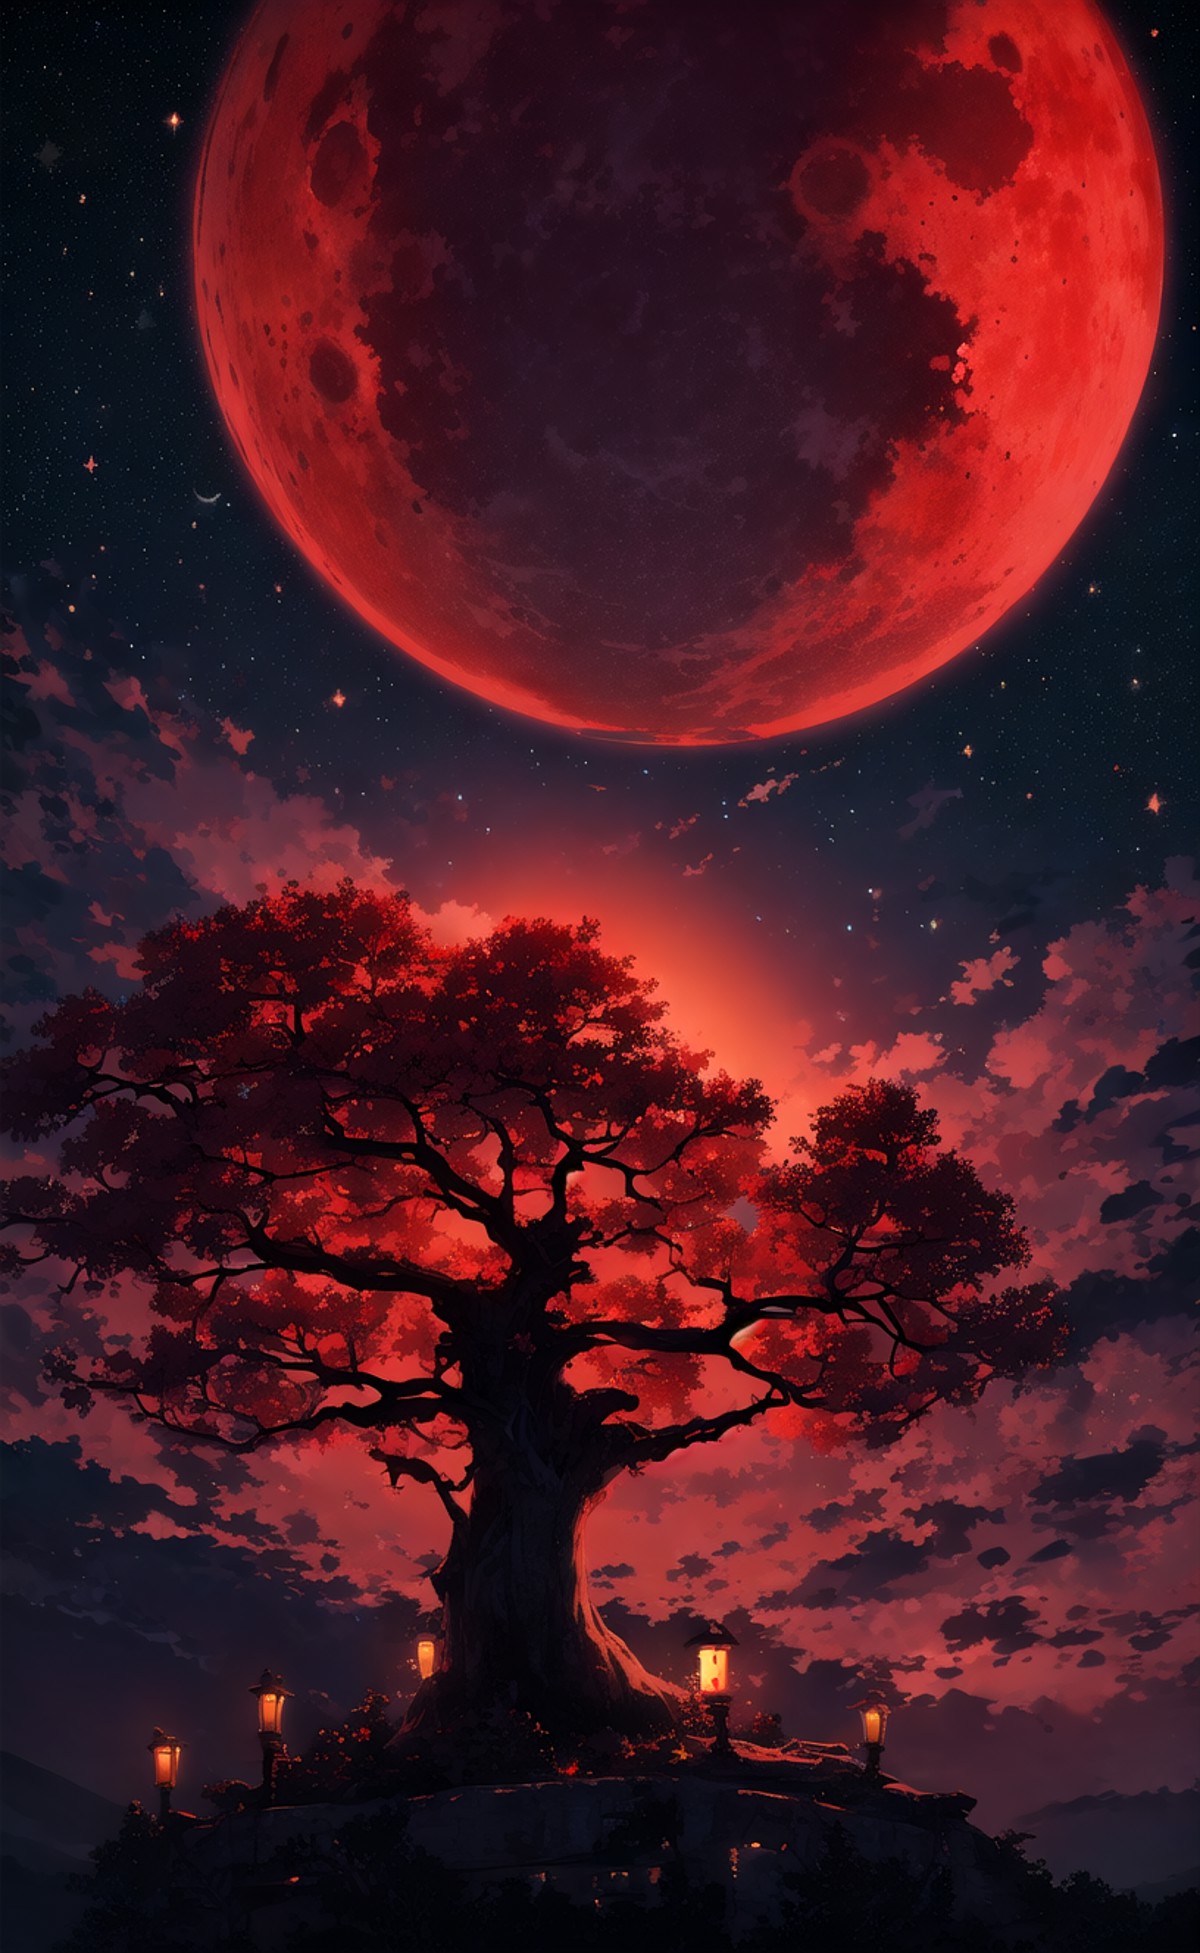 masterpiece, best quality, night, red moon, stars, clouds, tree,